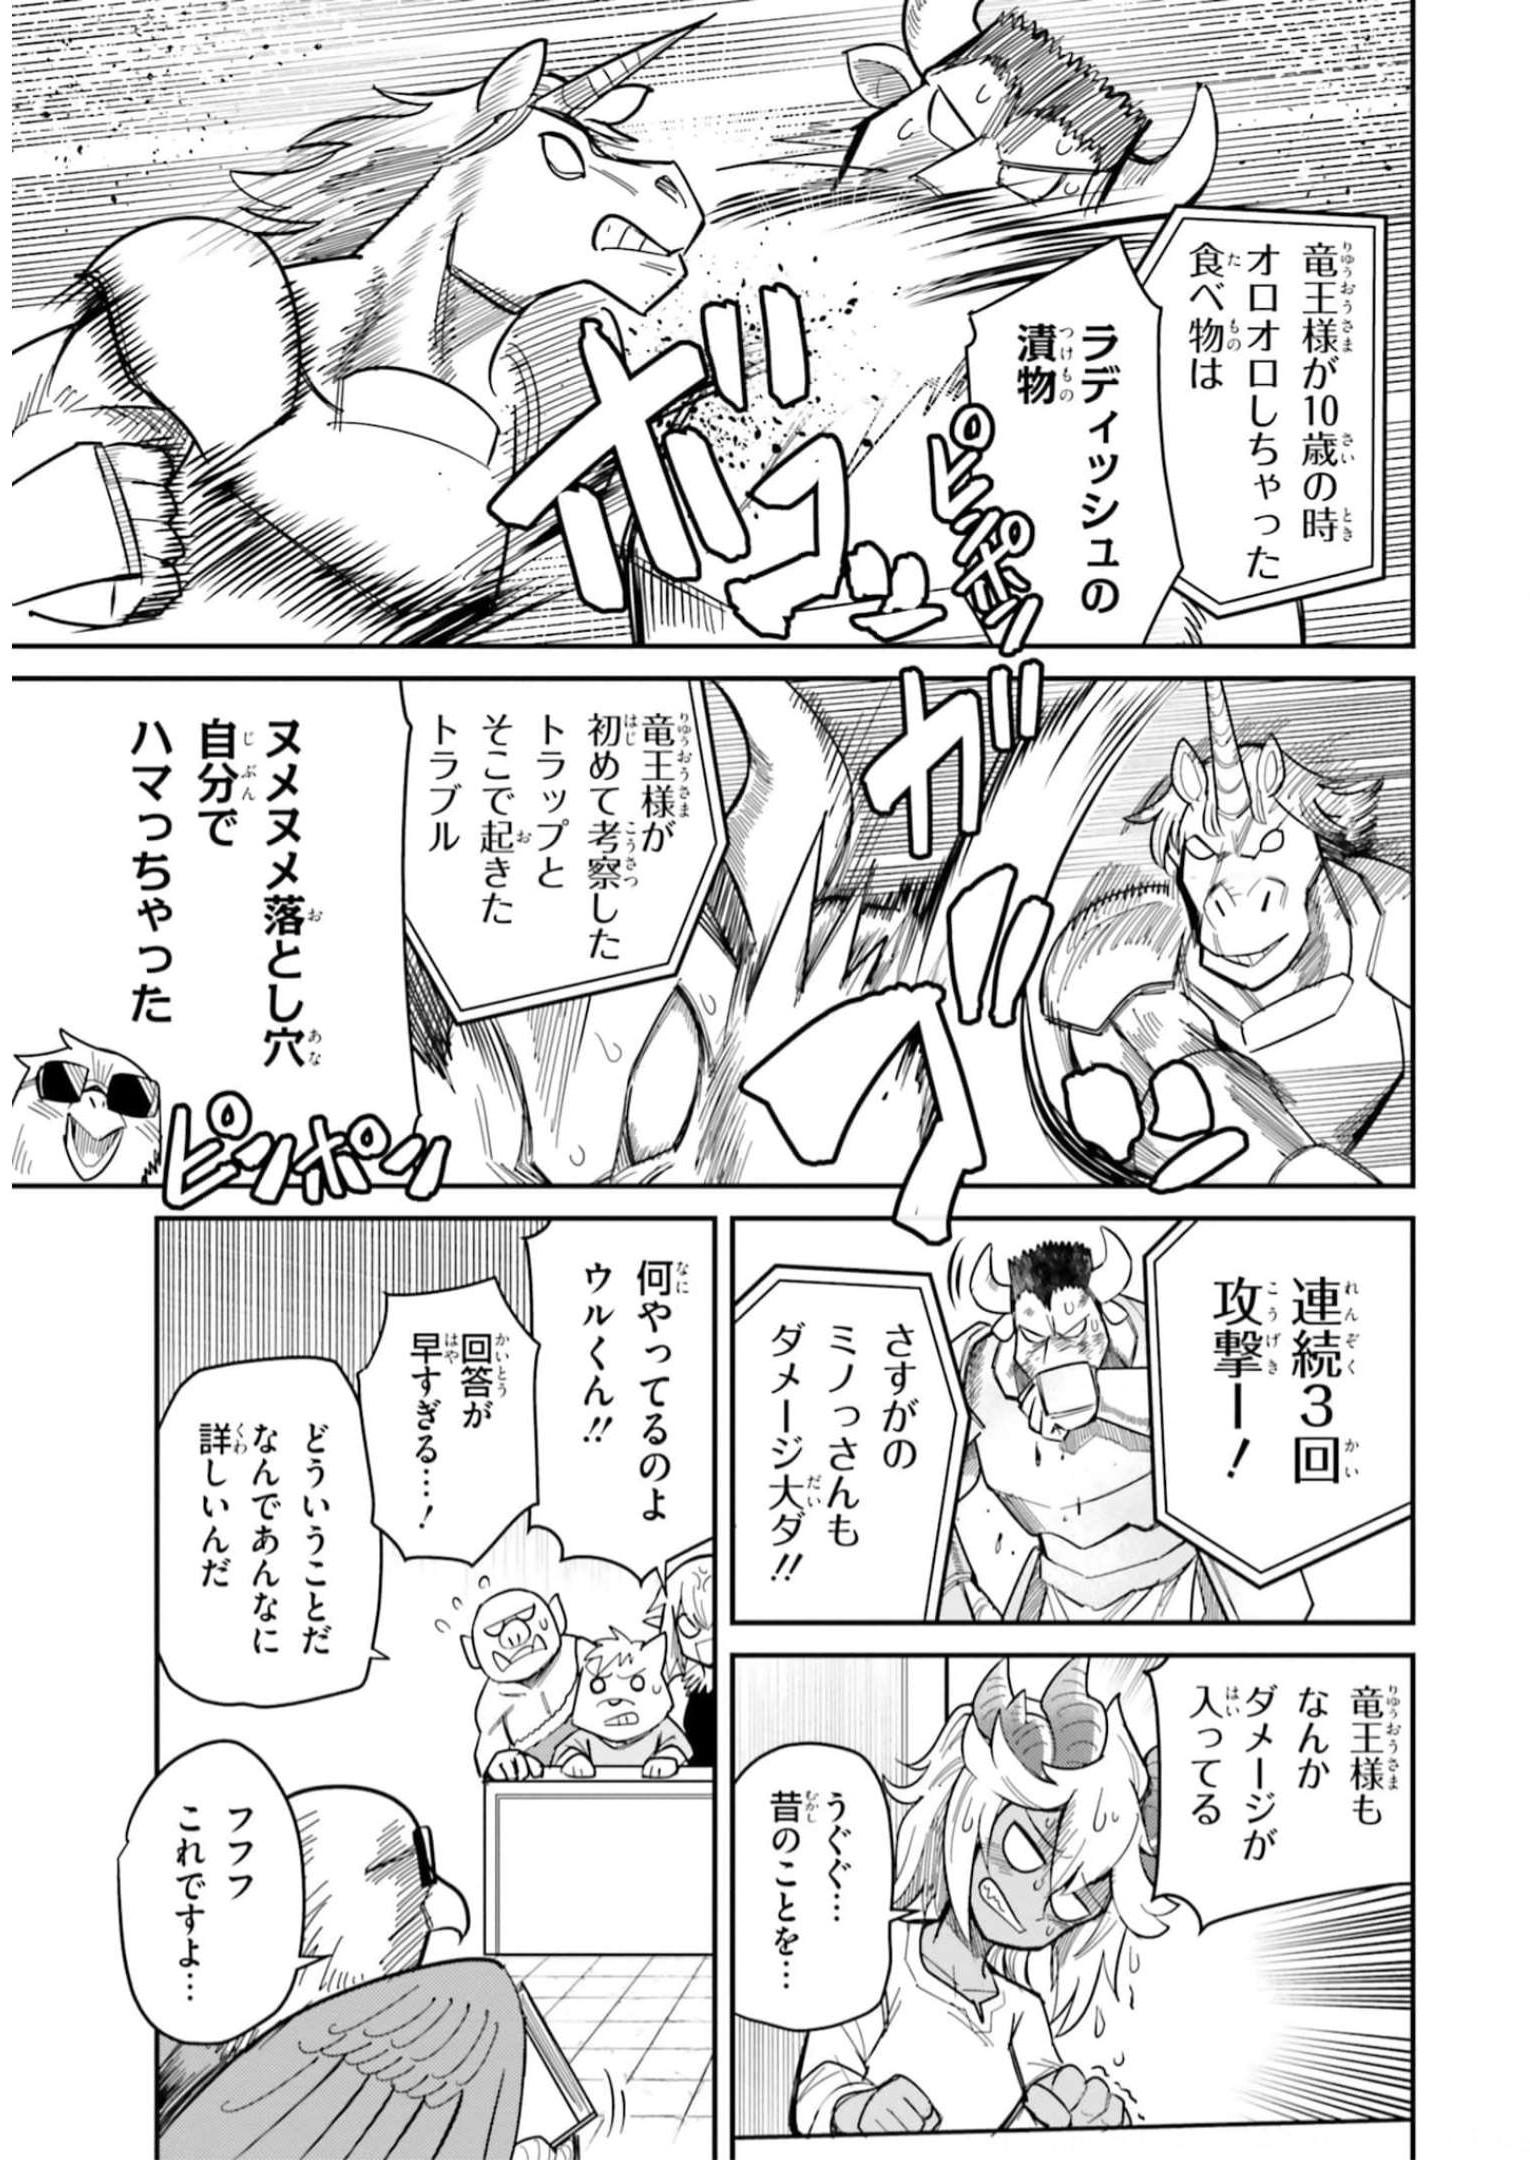 Dungeon Friends Forever Dungeon’s Childhood Friend ダンジョンの幼なじみ 第21話 - Page 6